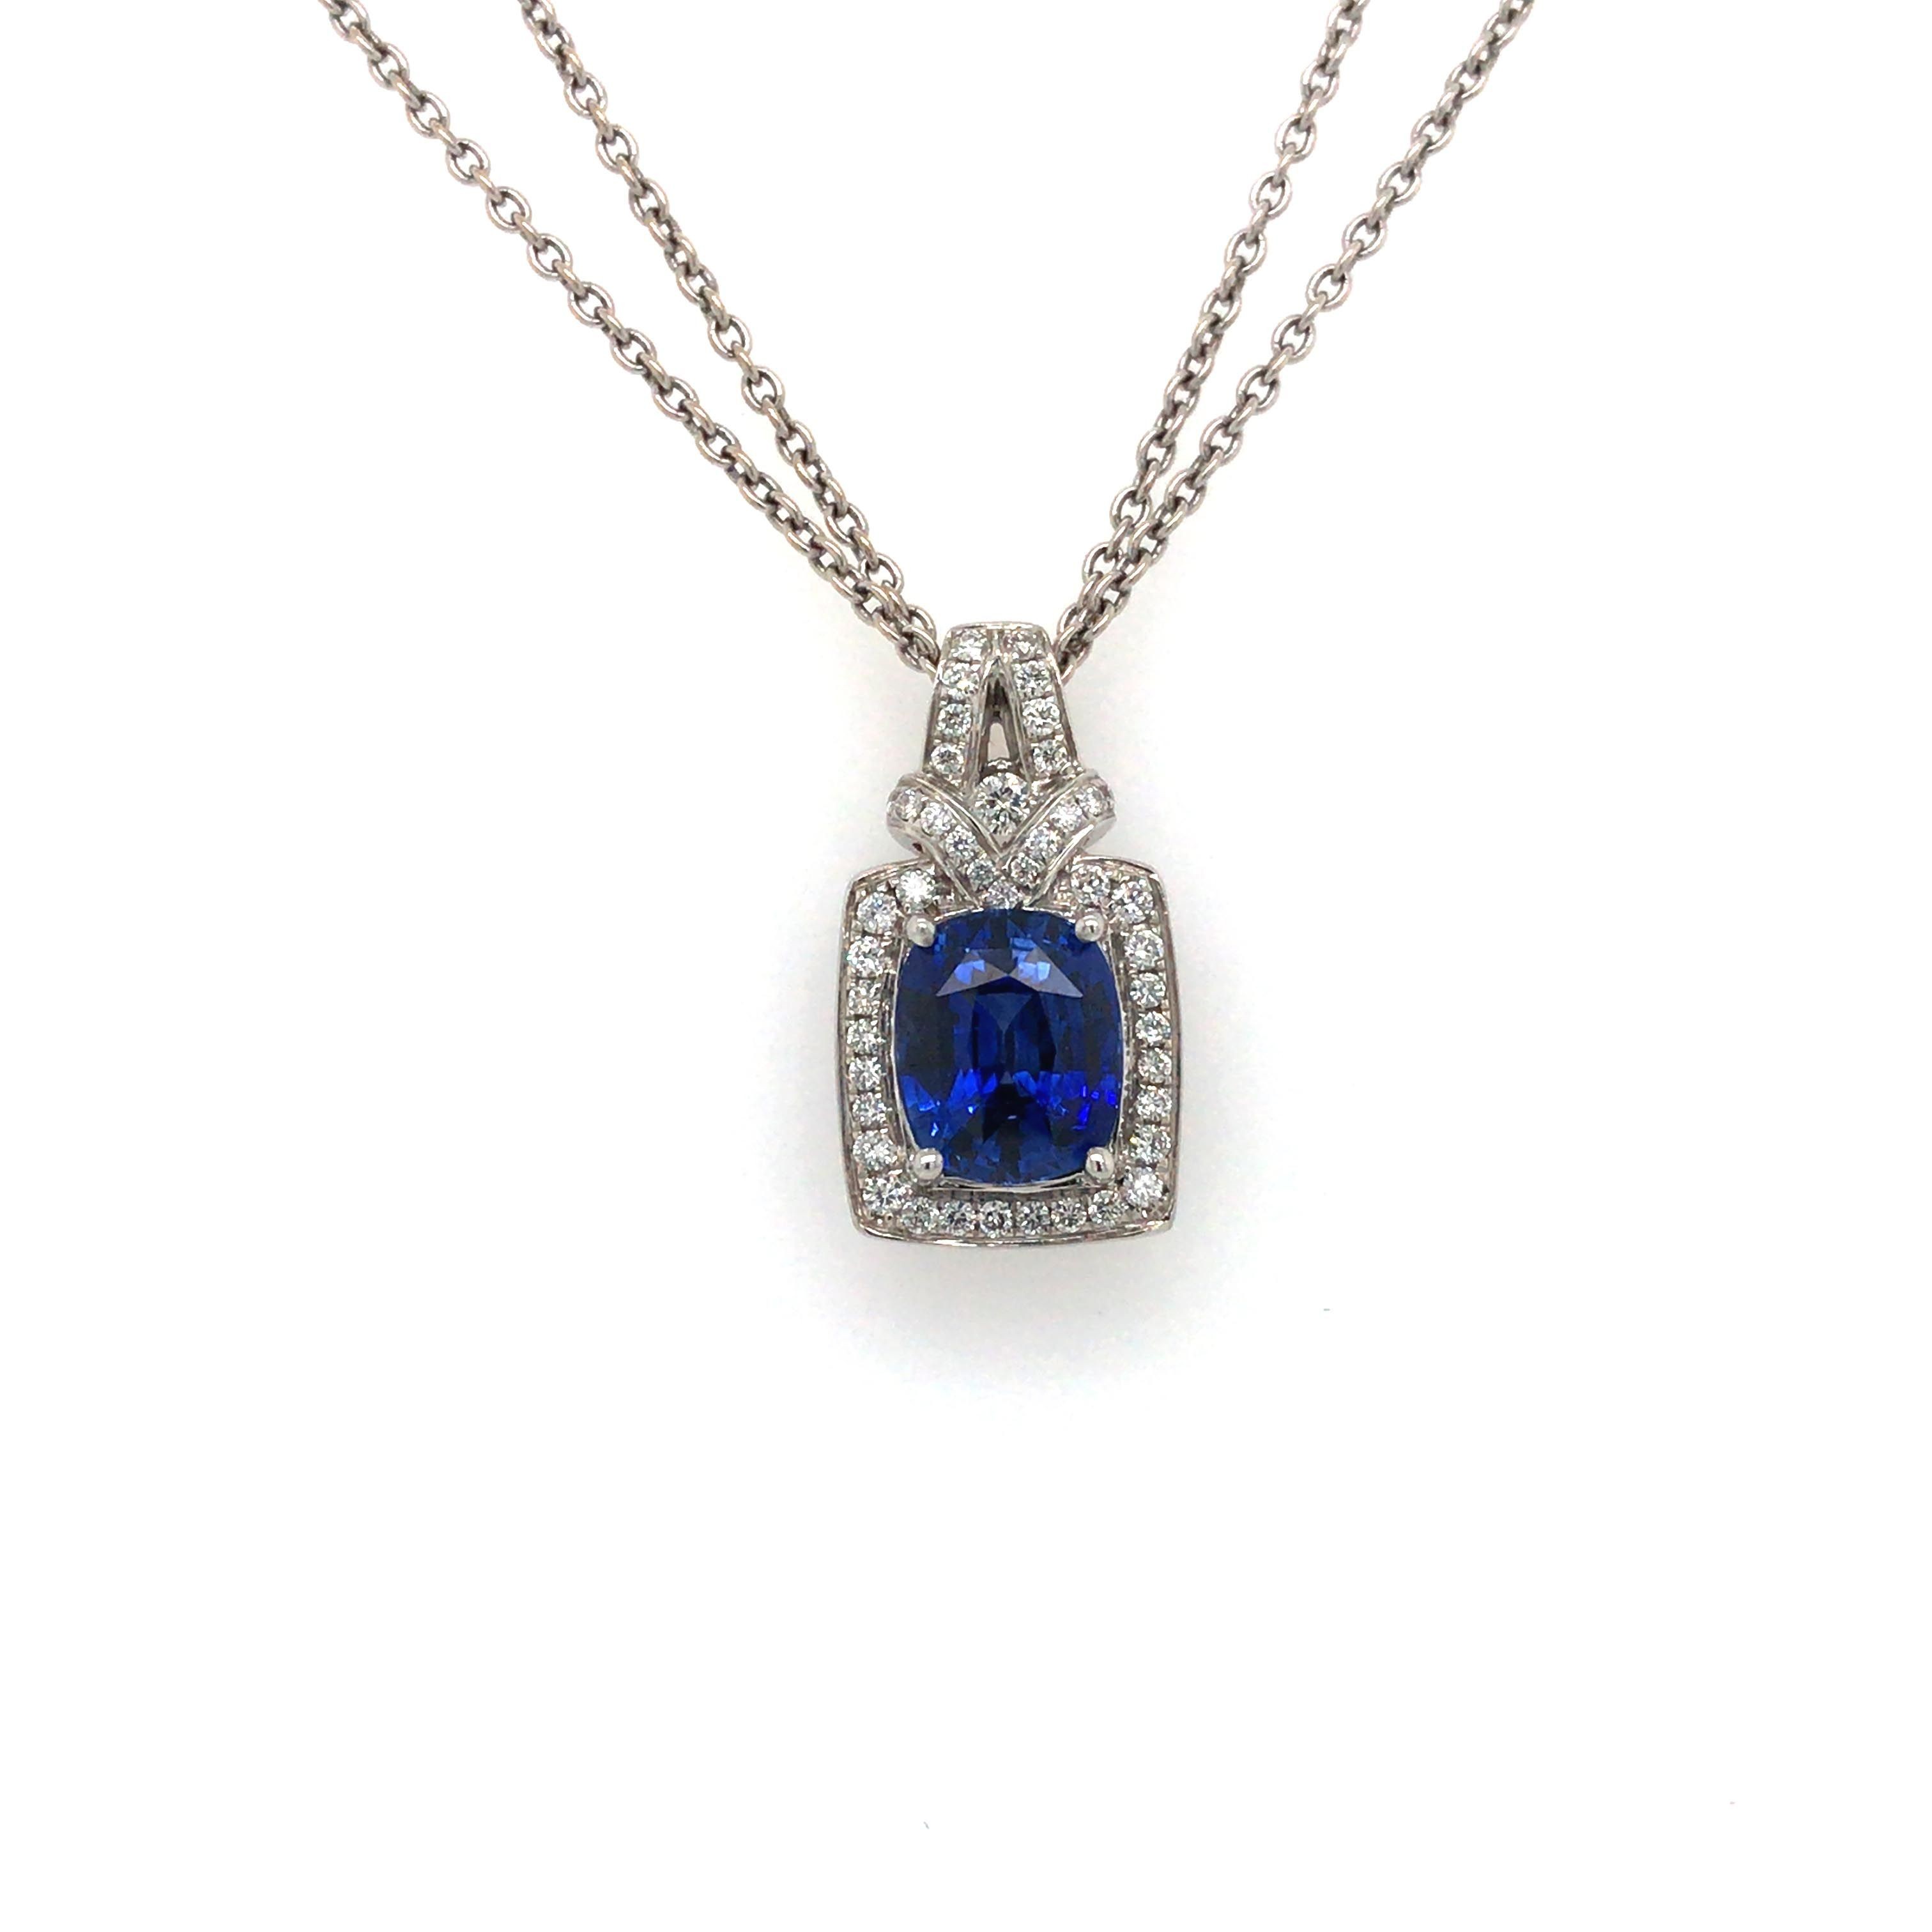 WHITE GOLD Pendant with Cushion Cut Sapphire - Simmons Fine Jewelry